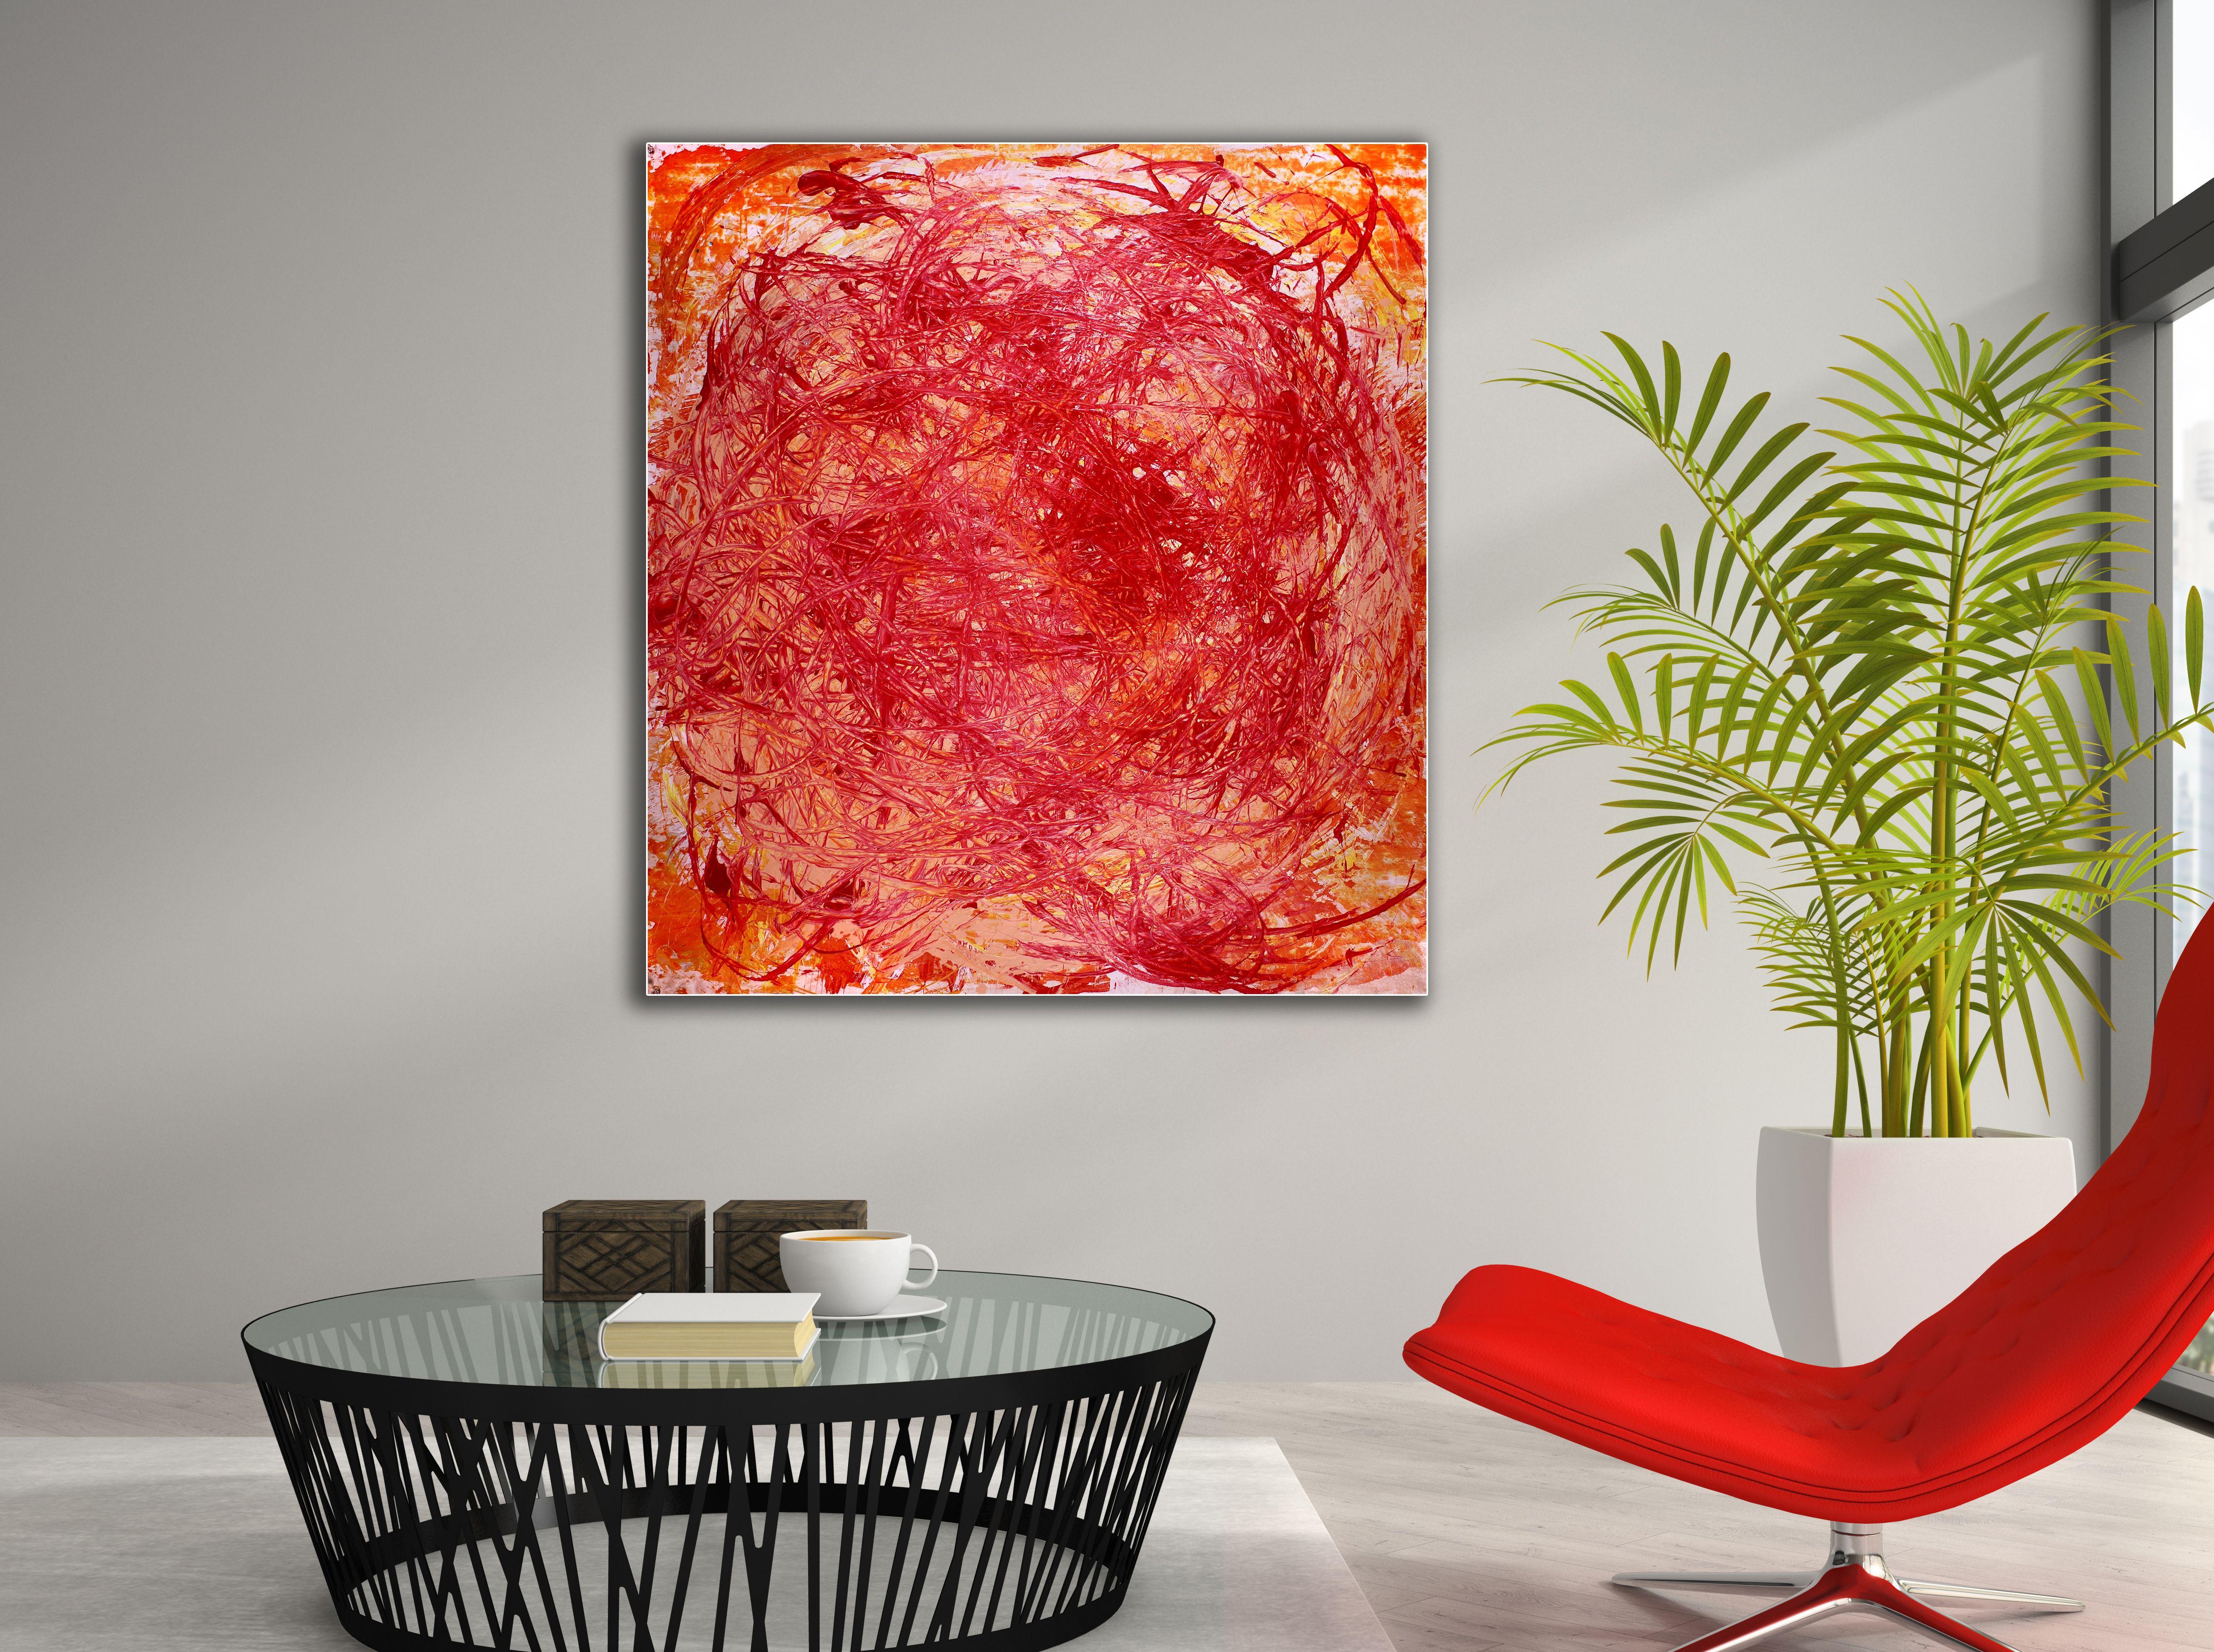 Bold acrylic abstract painting with lots of motion energy as well as lots of light and fast changes in color contrast. Active and contemplative feel with intricate details. Iridescent mediums used... triple primed canvas and heavy layered with high